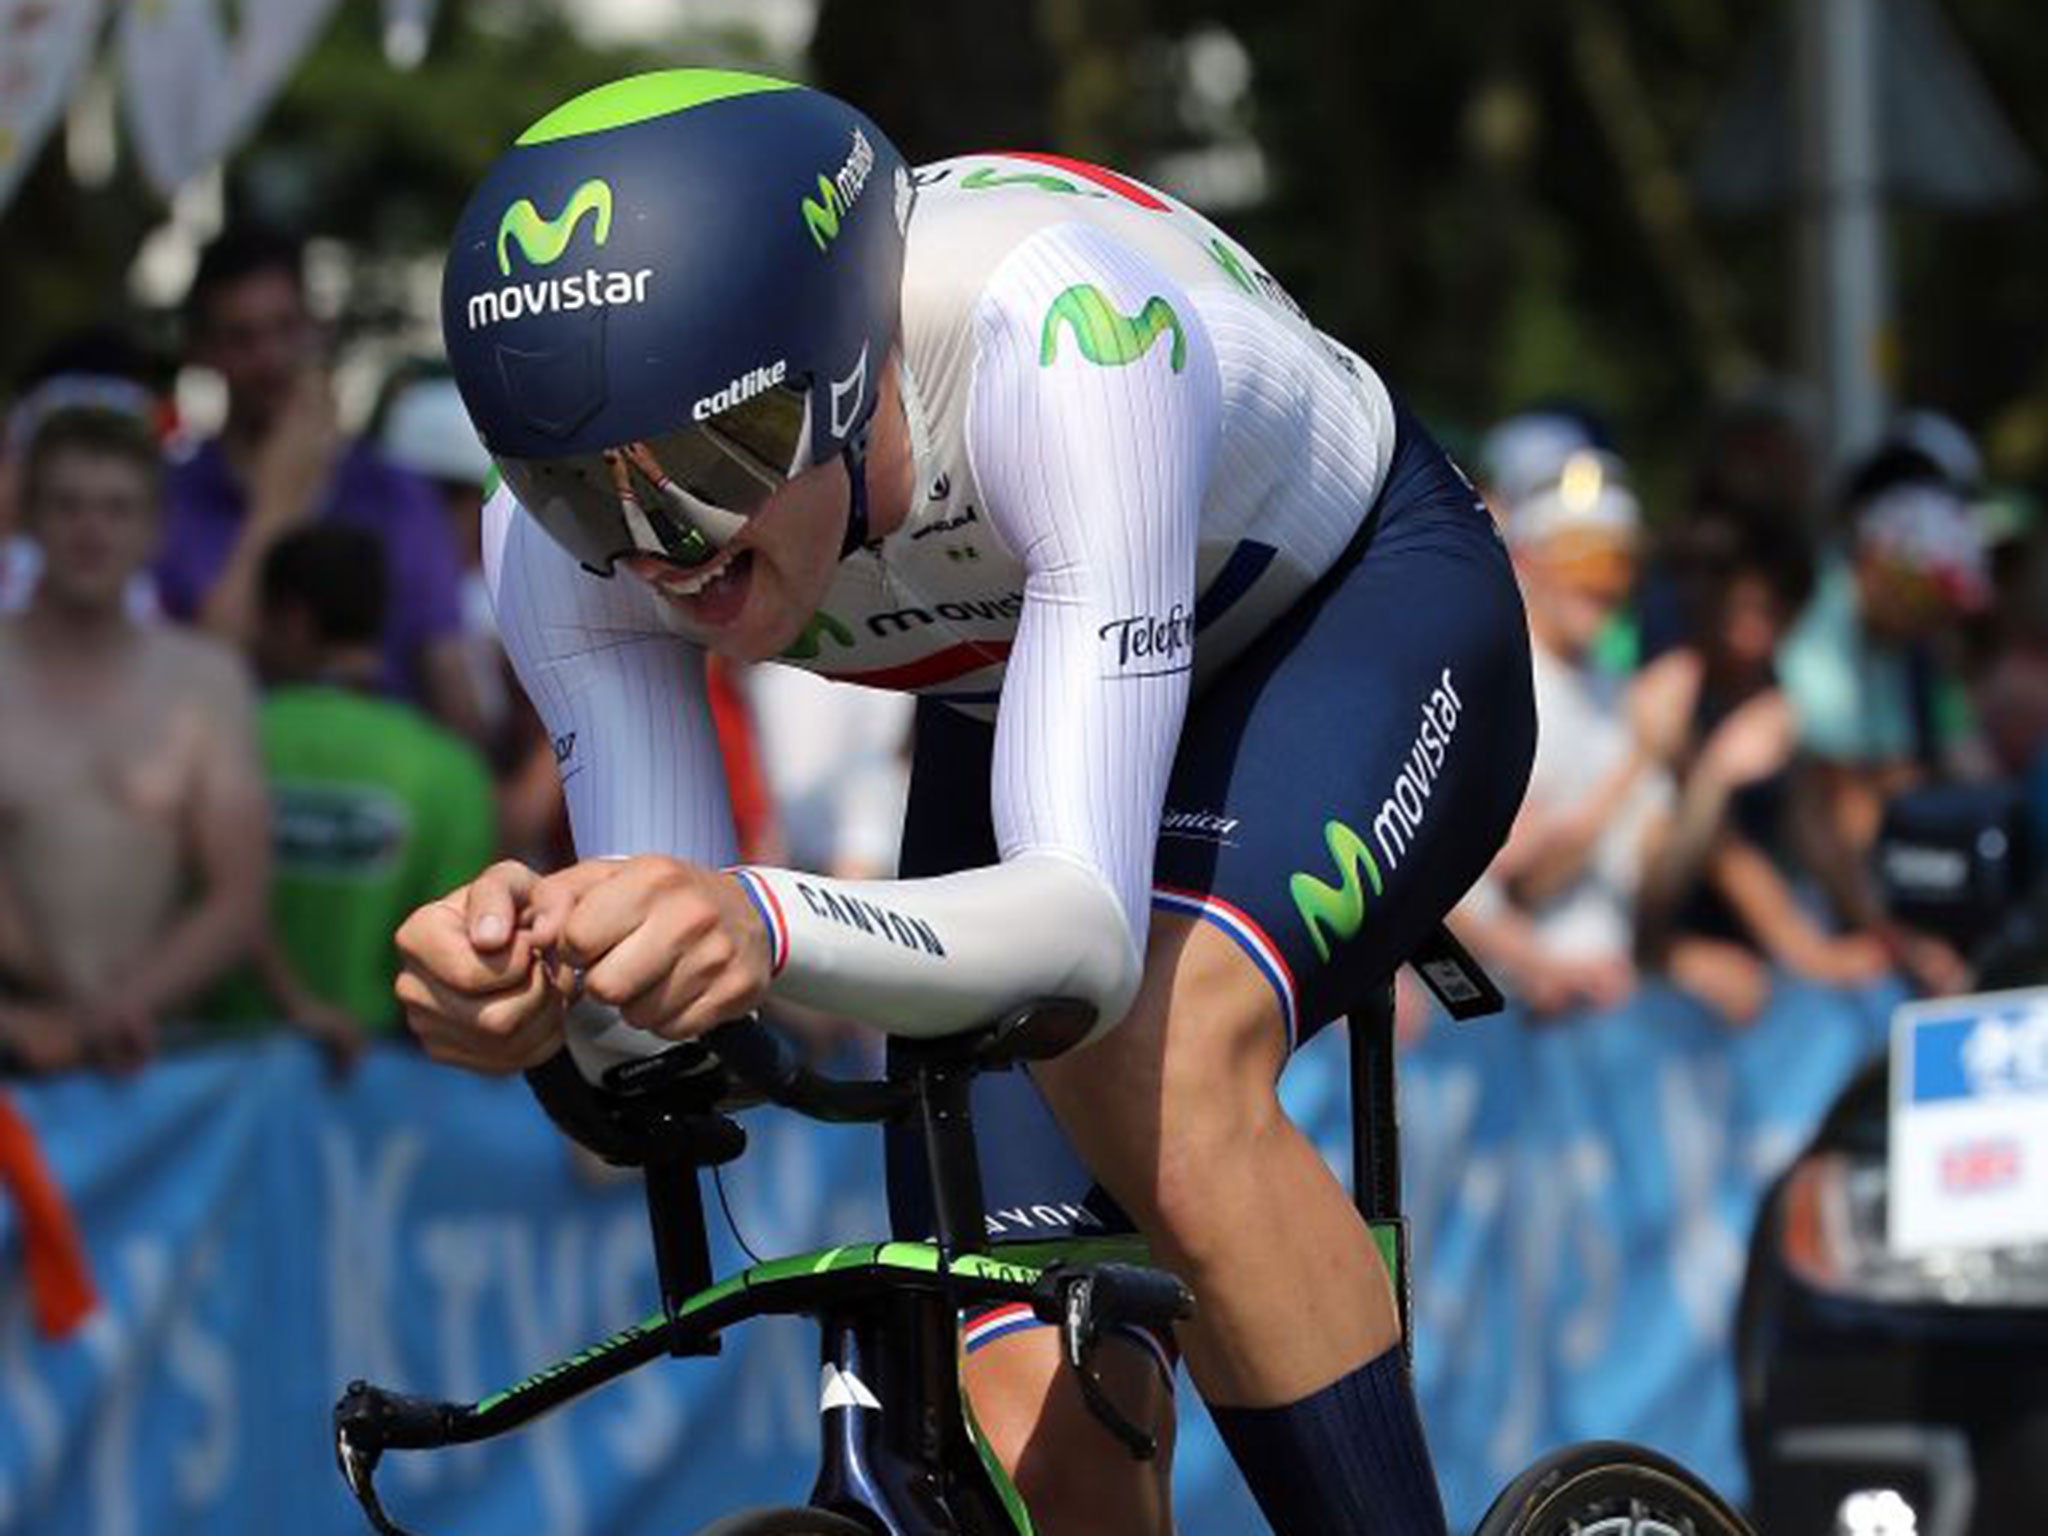 Tomorrow’s time trial is the main event for Alex Dowsett